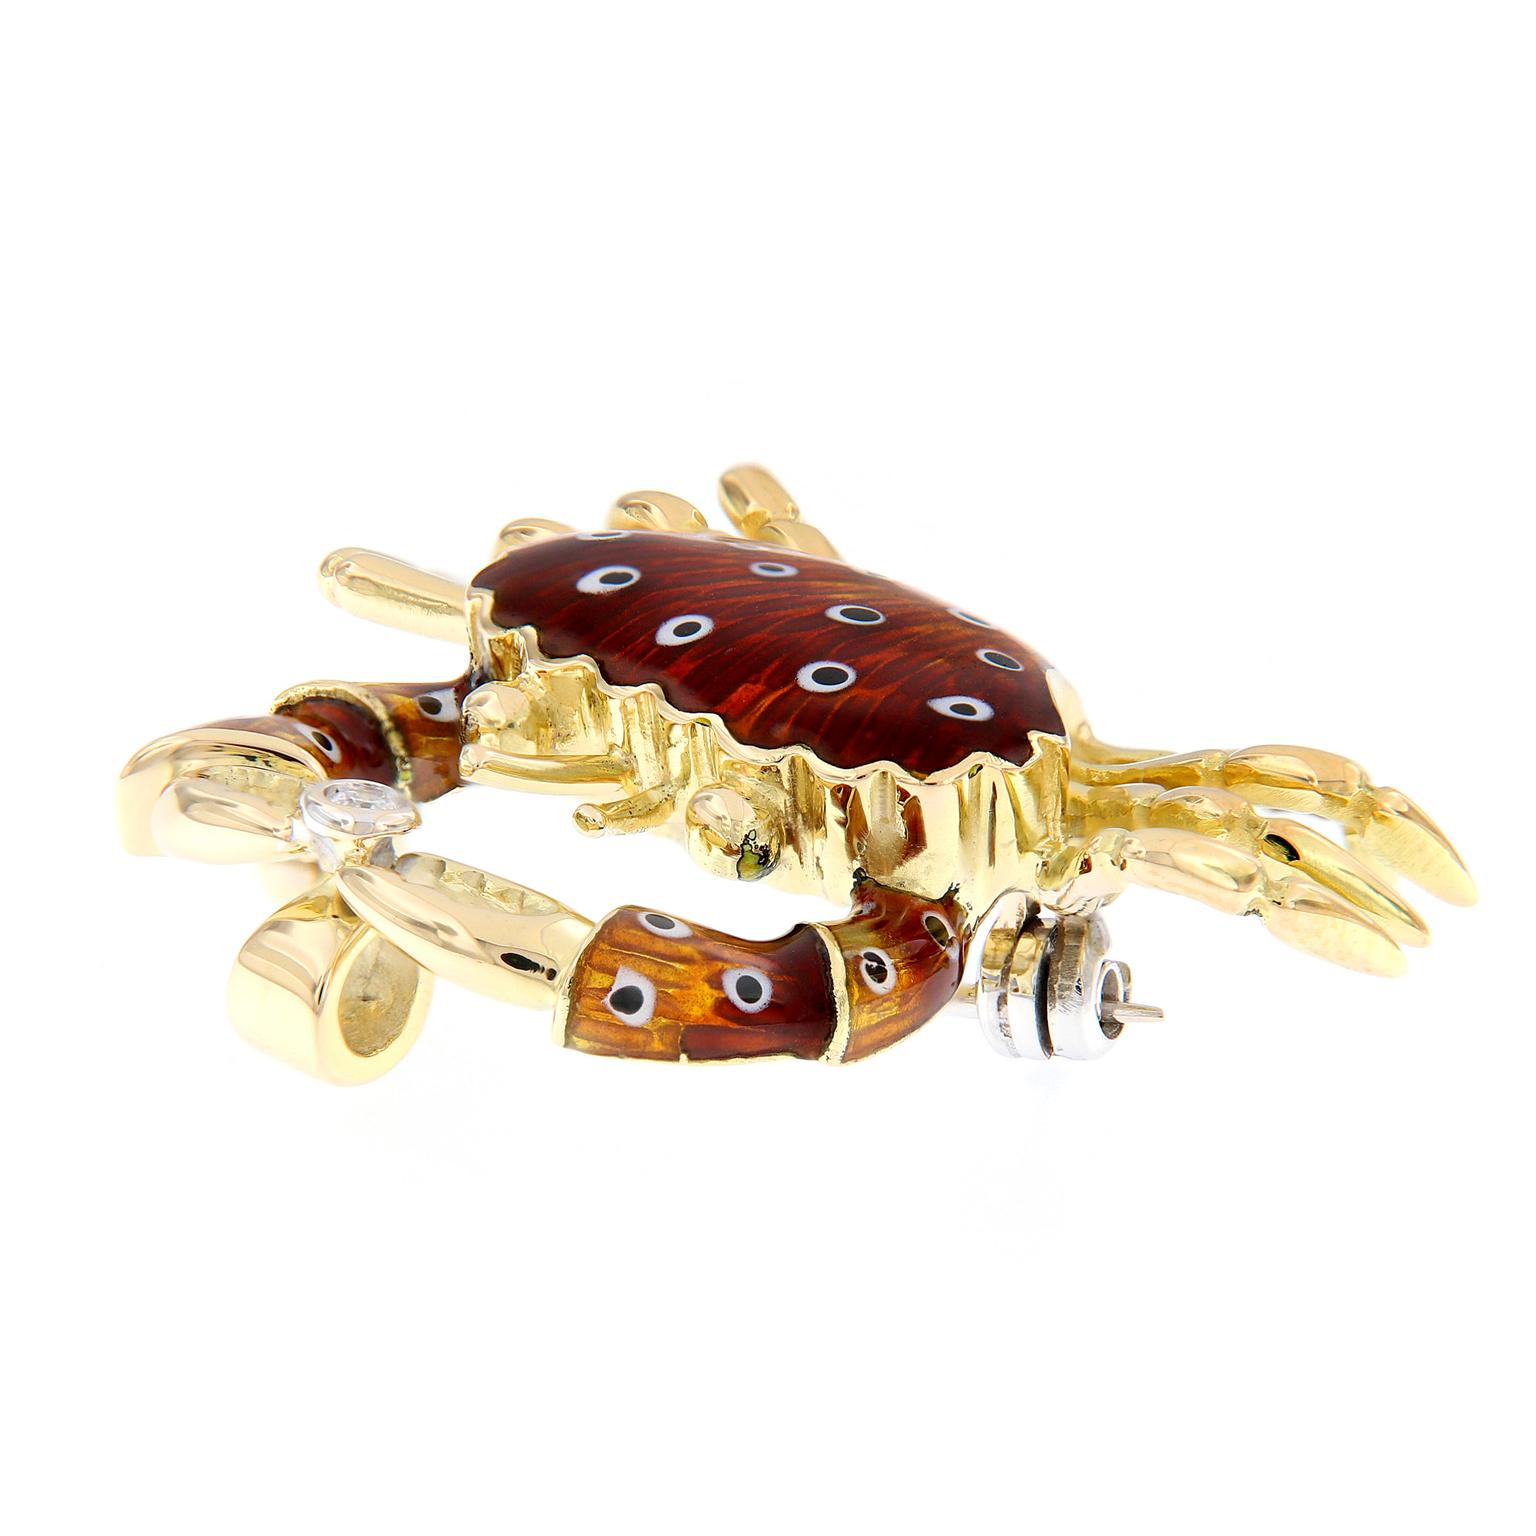 Beautiful crab brooch/pendant is crafted in 18k yellow gold made in Italy. Features a colorful enameled body and a bezel set diamond. The crab can be worn as a brooch or as a pendant. Weighs 10.3 grams.

Diamonds 0.03 carat